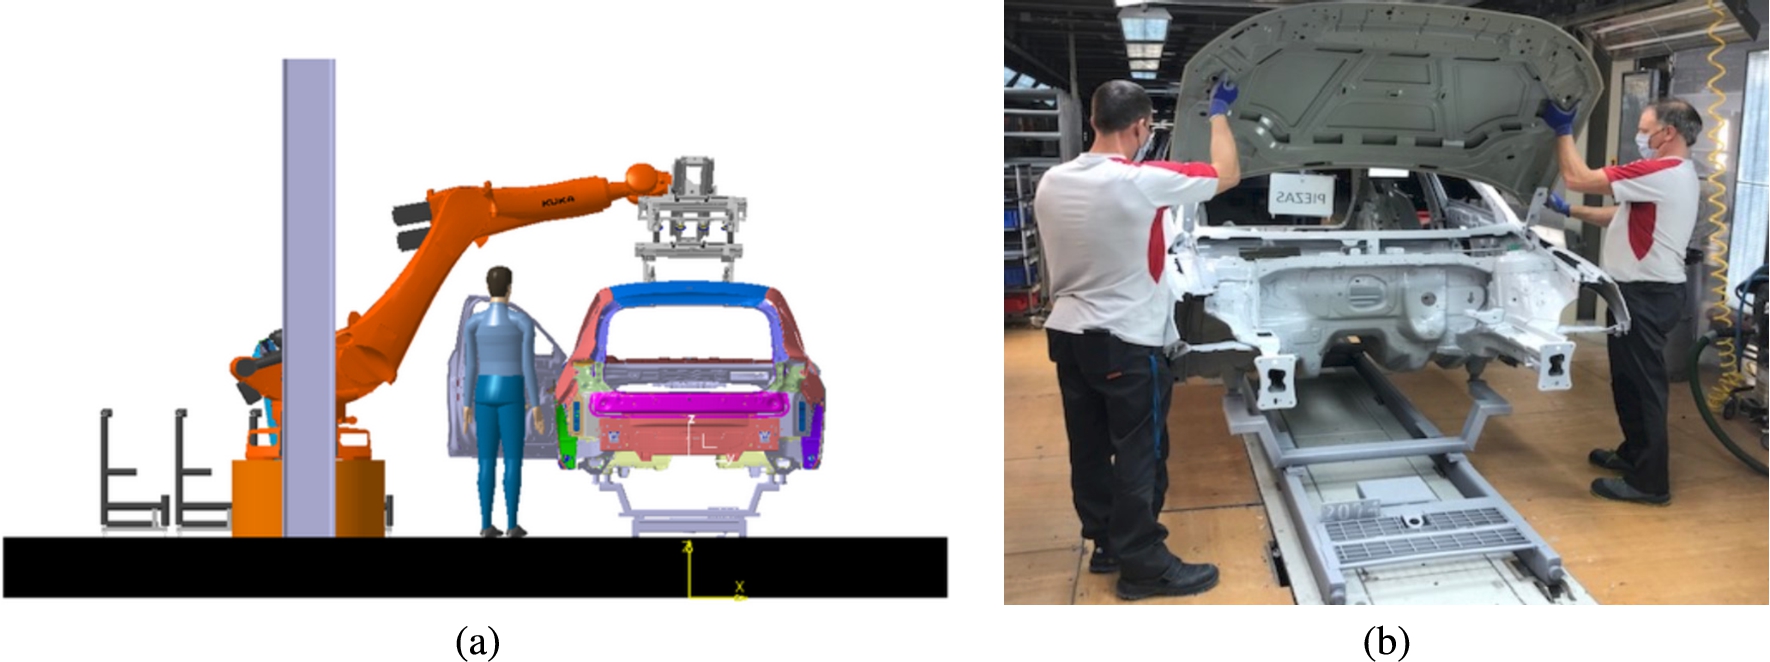 Design of the collaborative cell for the automotive scenario (a) and the production line for the assembly of the chassis (b).